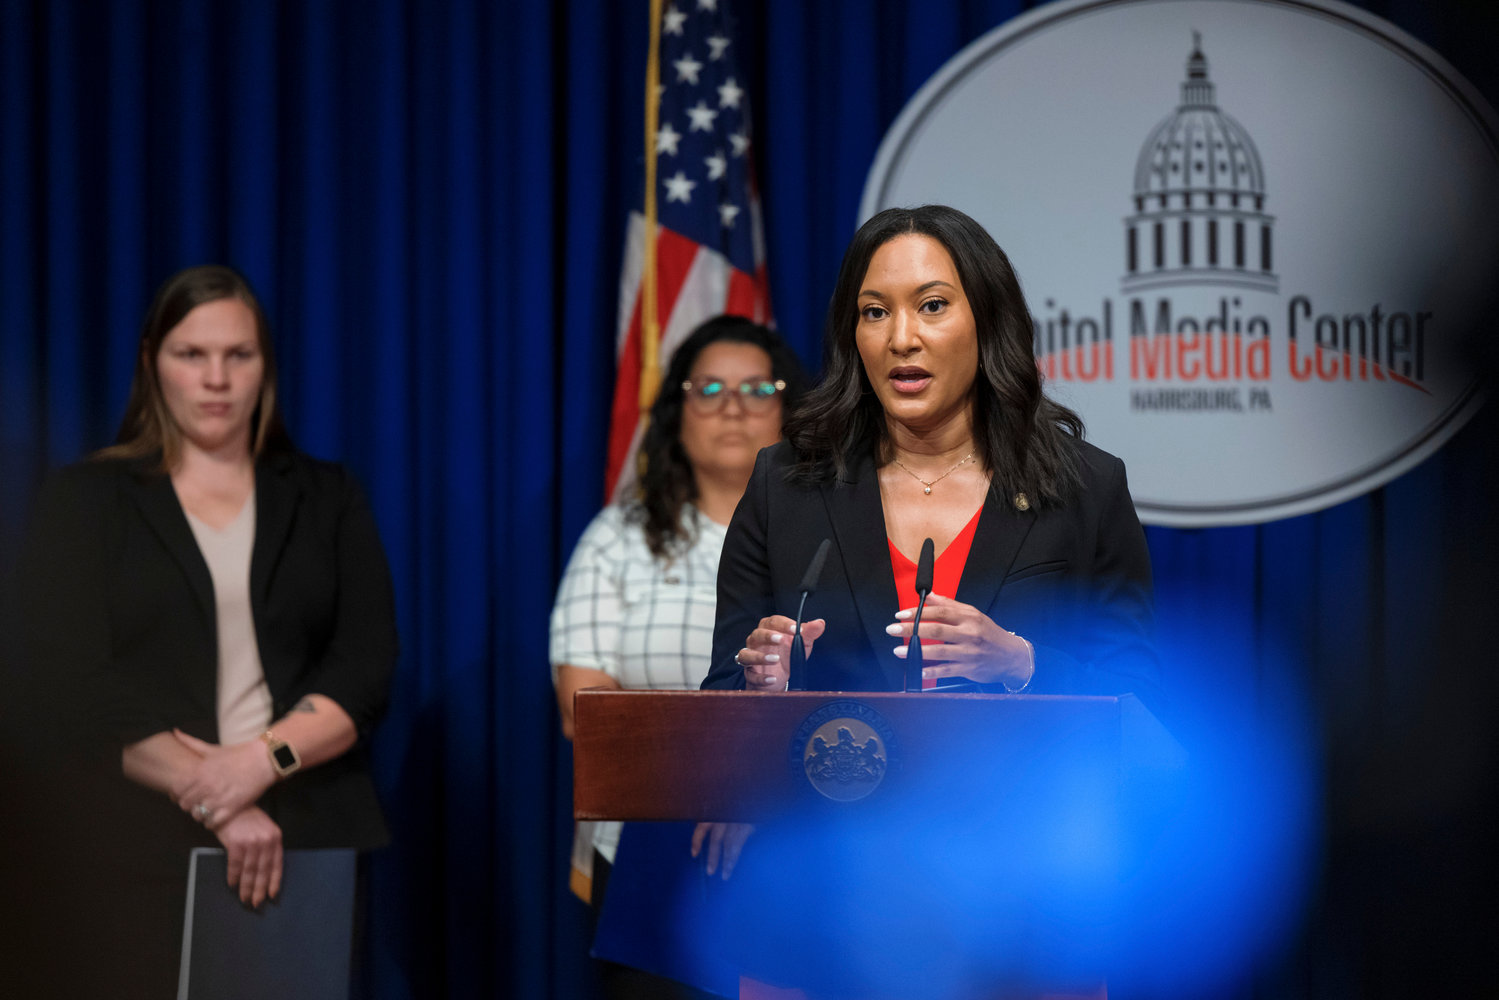 Acting Secretary of State Leigh M. Chapman speaks during a press conference, which highlighted the Wolf Administrations efforts to expand voter access, inside the Capitol Media Center on Tuesday, September 13, 2022.